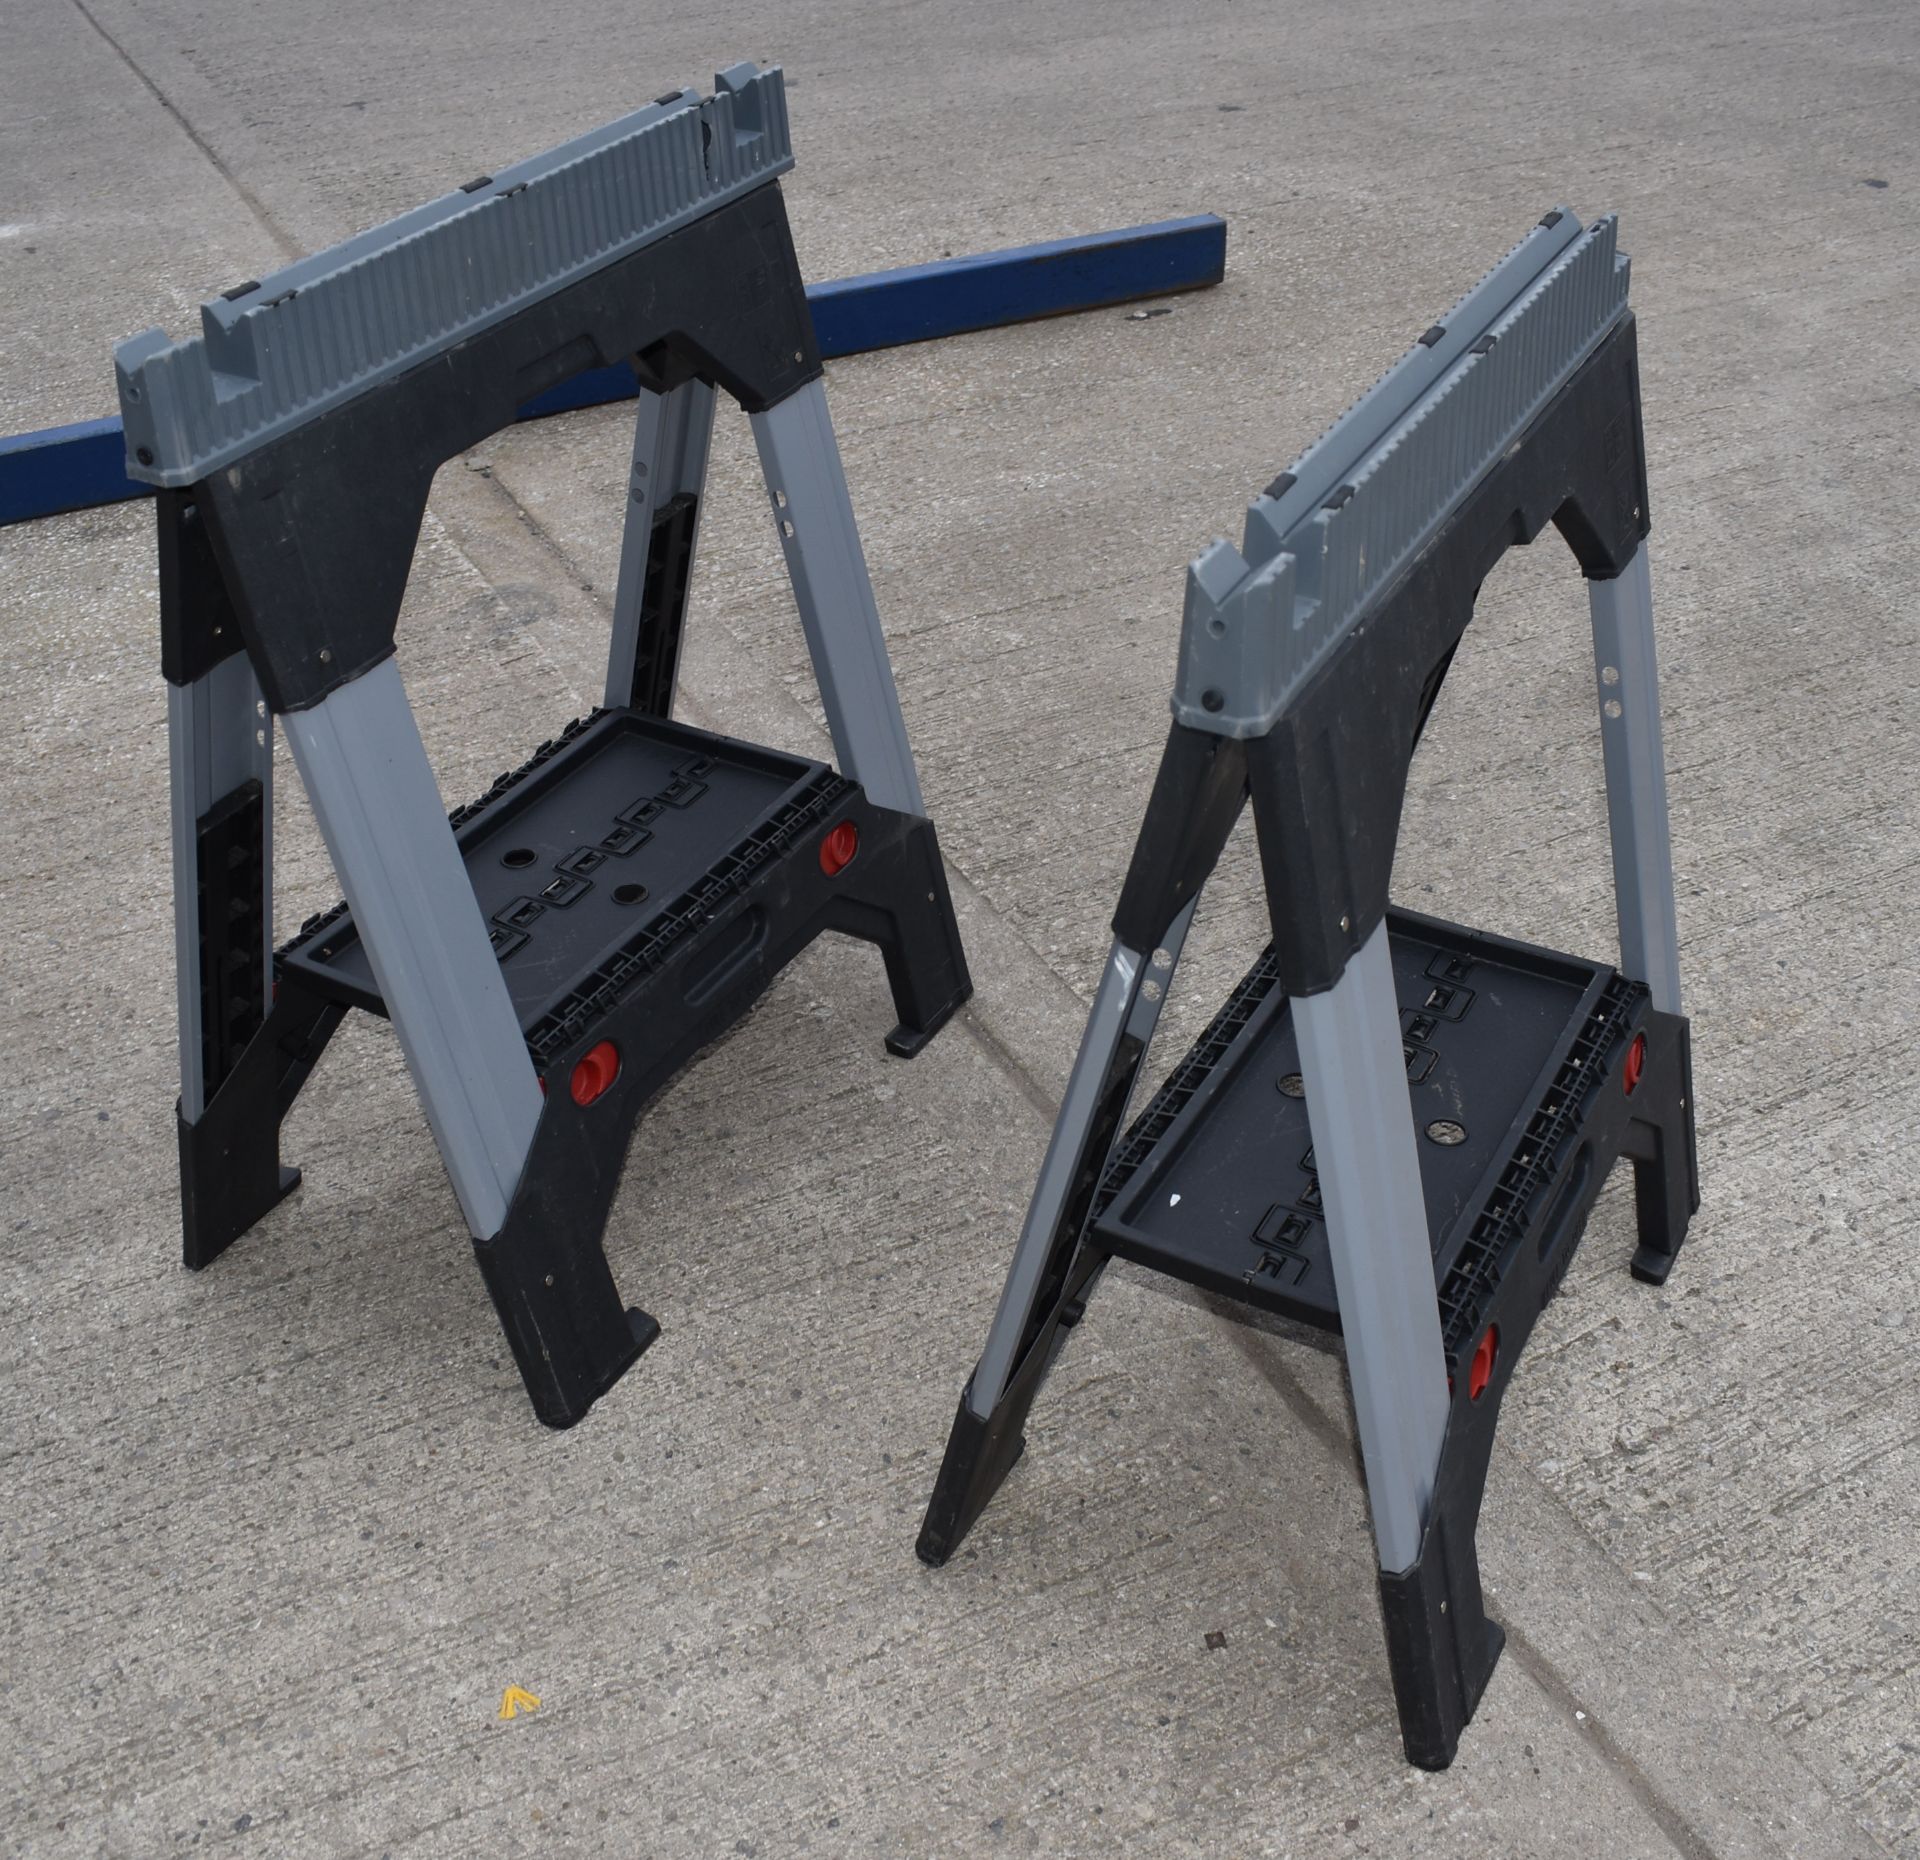 2 x STANLEY Fatmax Telescopic Saw Horses - 68(W) x 39(D) x 82(H) cms - RRP £172 - Ref: K236 - CL905 - Image 3 of 13